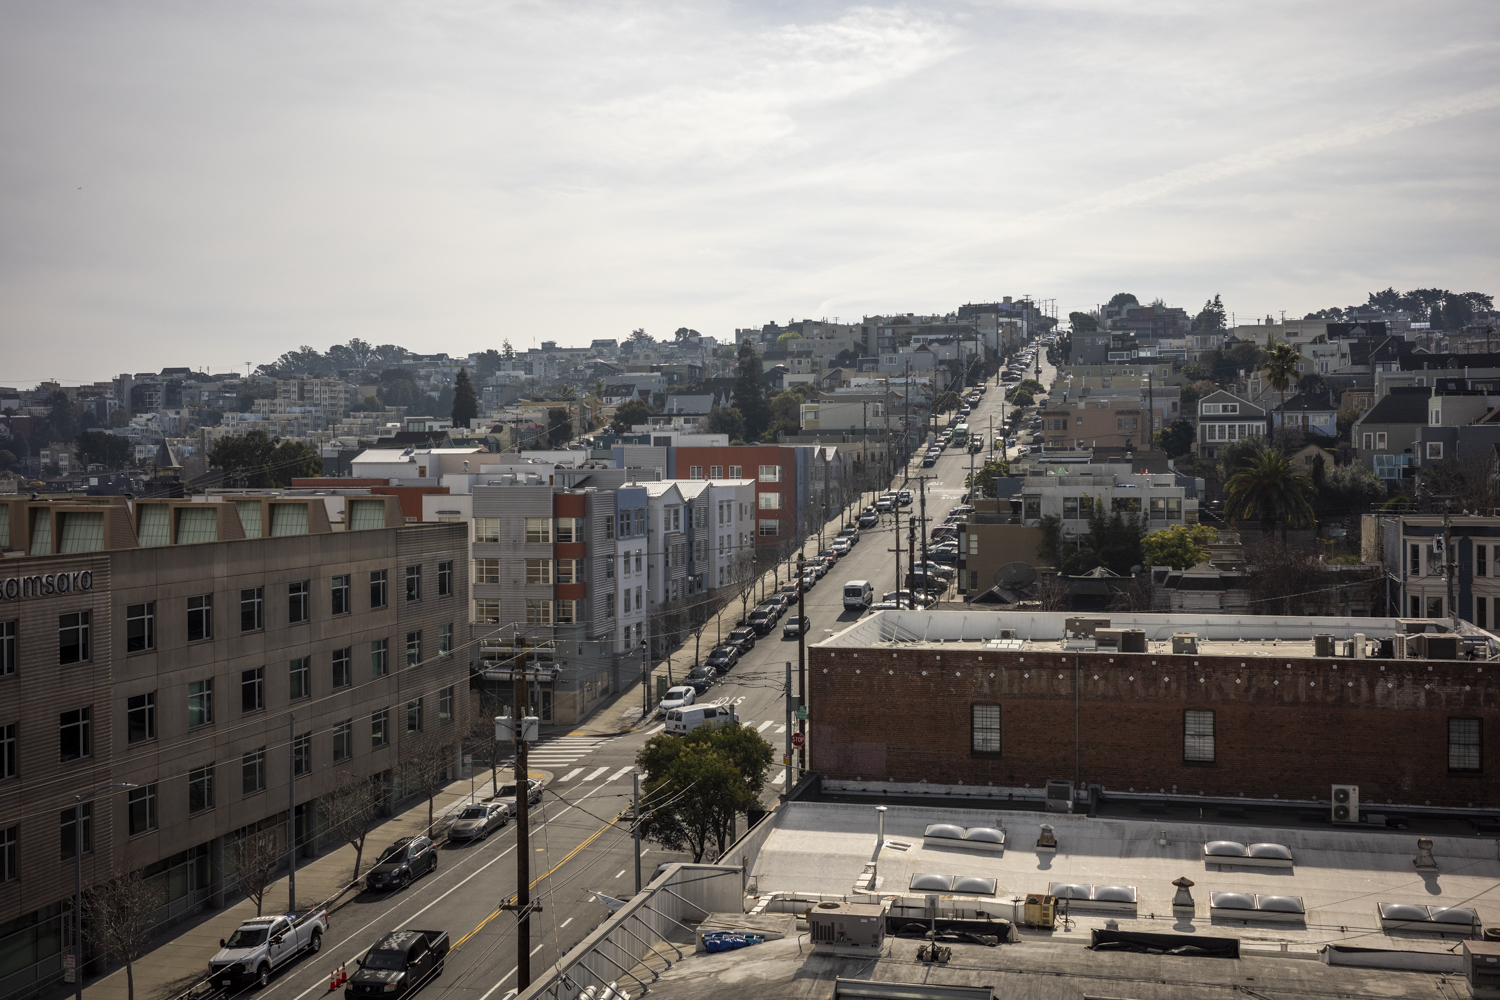 Views of Potrero Hill from the 300 Kansas Street rooftop terrace, image by author